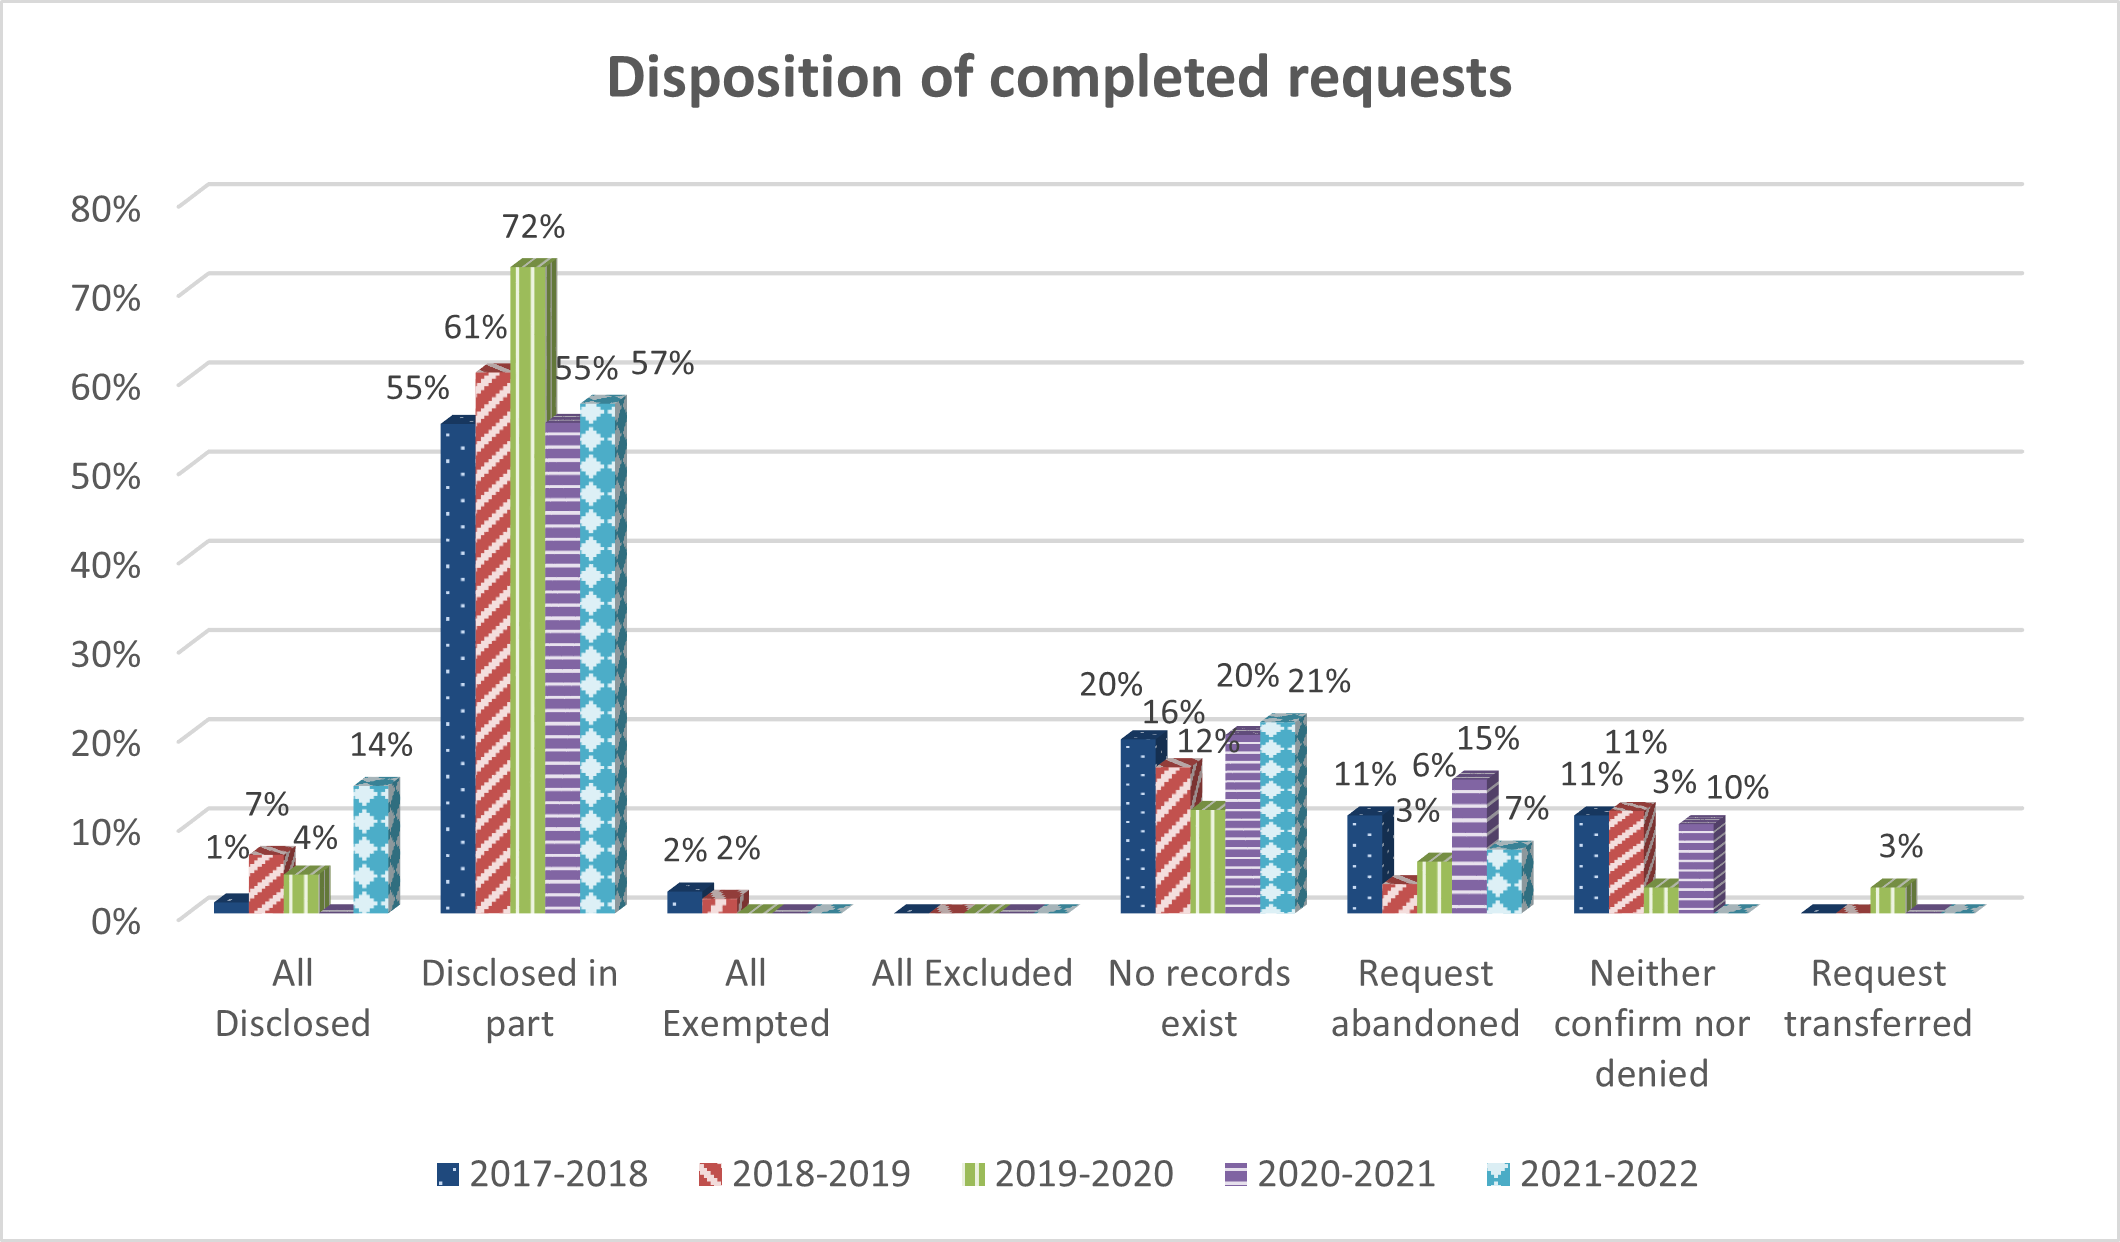 Table: Disposition of completed requests - Long description follows